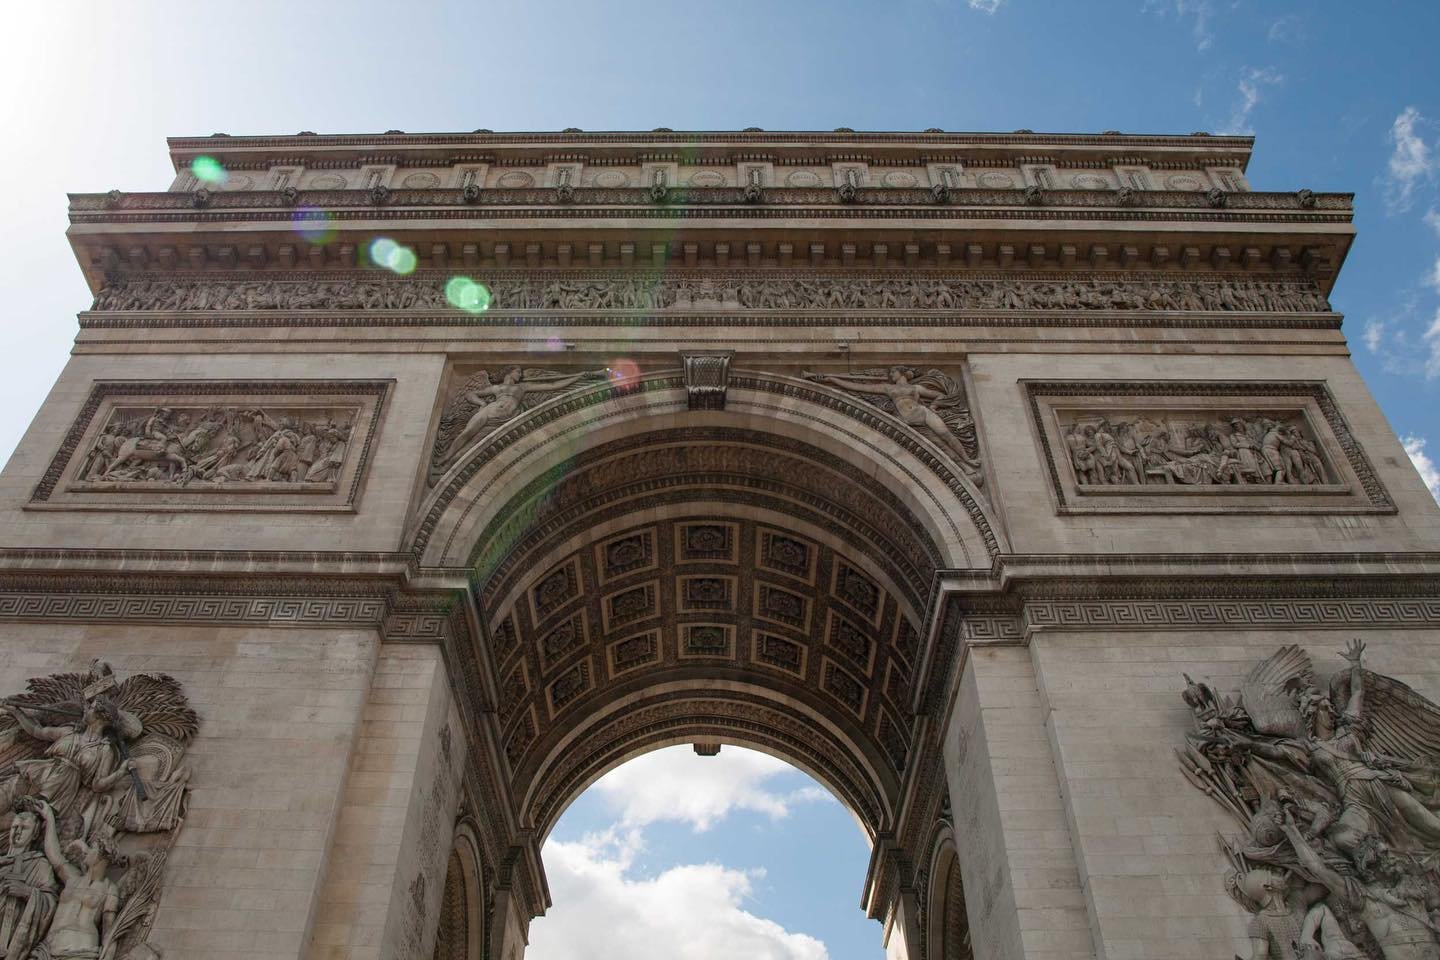 Perhaps the most famous place in the 8th arrondissement of Paris , is the Arc de Triomphe. It was built to commemorate Napoleon&rsquo;s victories. It sits at the centre of 12 avenues and traffic looks chaotic. However, it is possible to access the ar